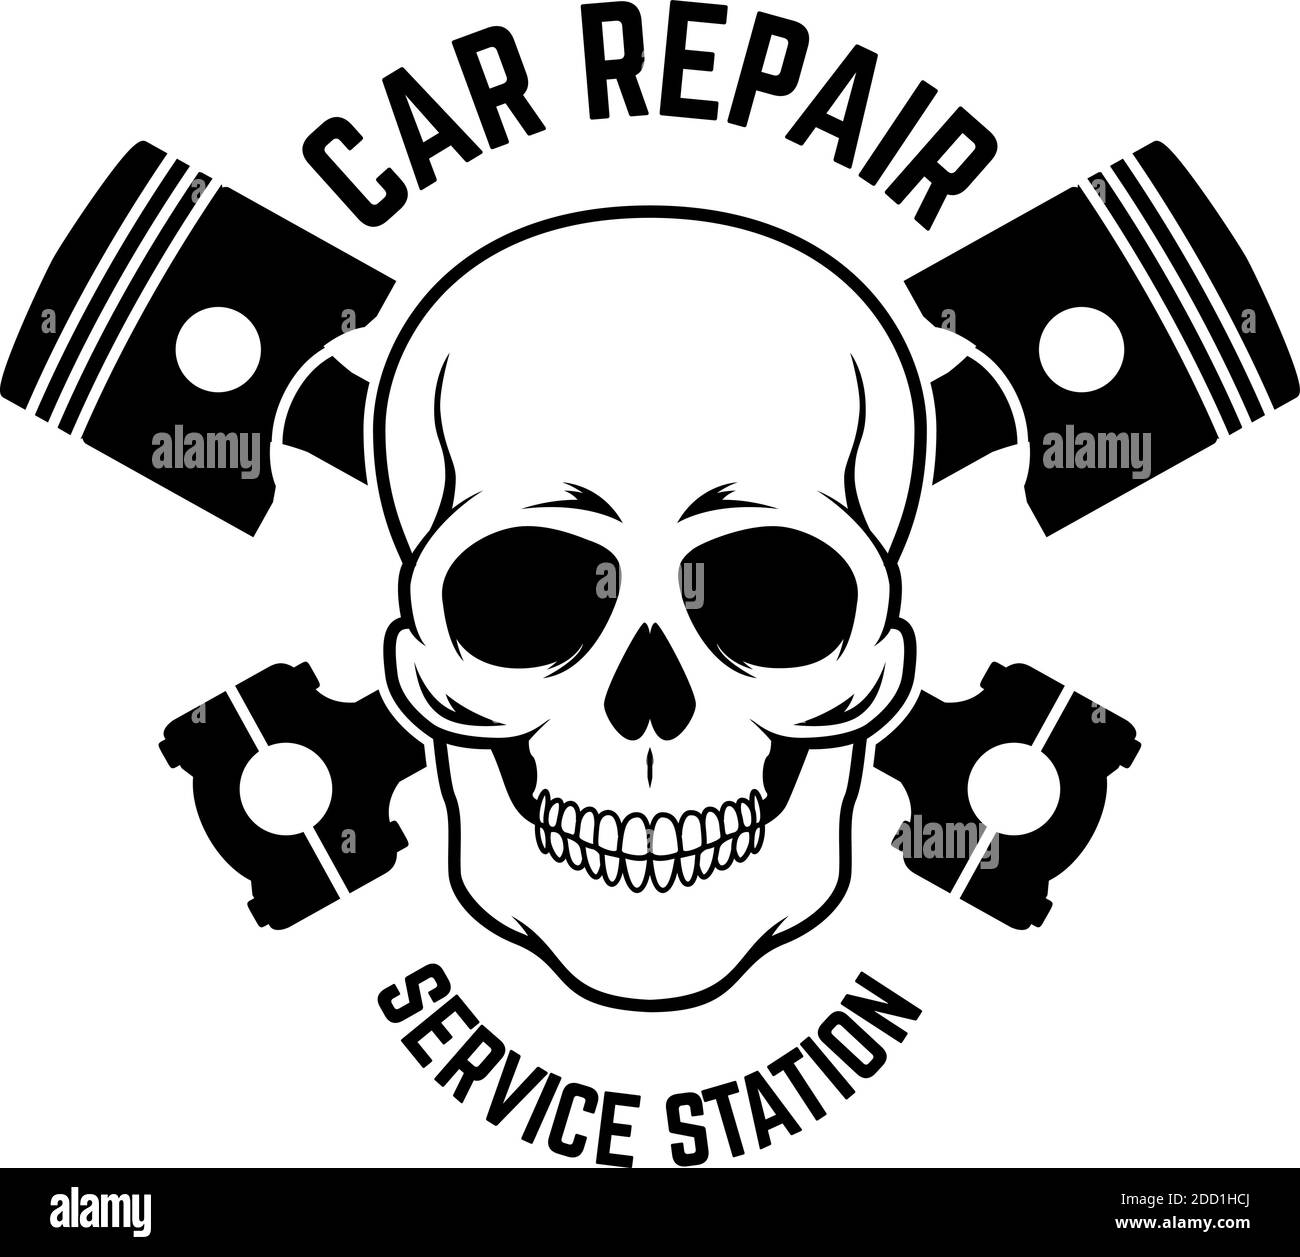 Car repair. Service station. Emblem template with skull and crossed pistons. Design element for logo, emblem, sign, poster, card, banner. Vector illus Stock Vector